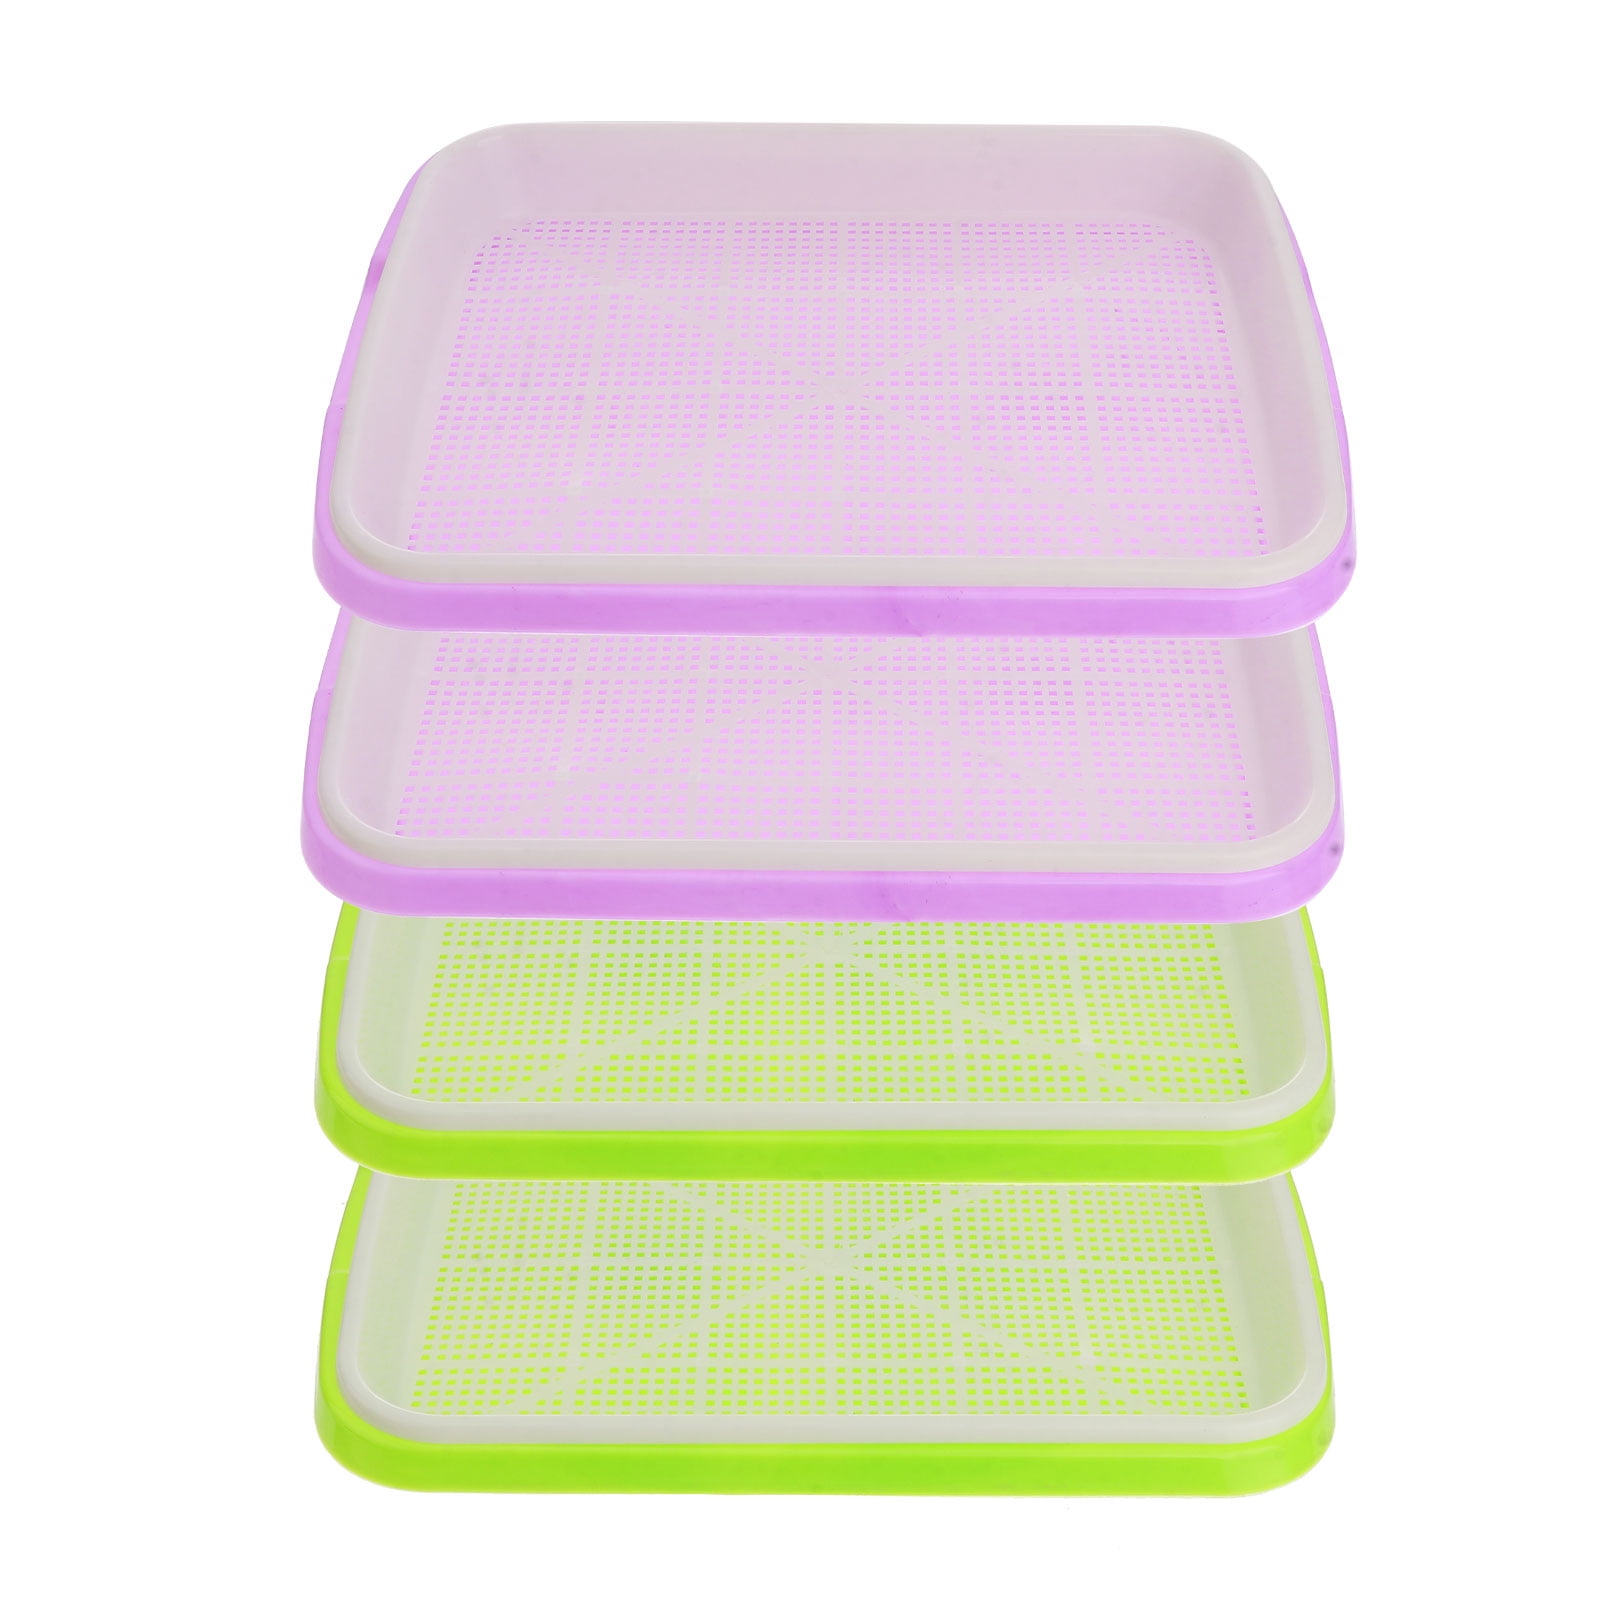 4pcs Sprouting Basins Soilless Sprouter Trays DIY Nursery Site for Public 